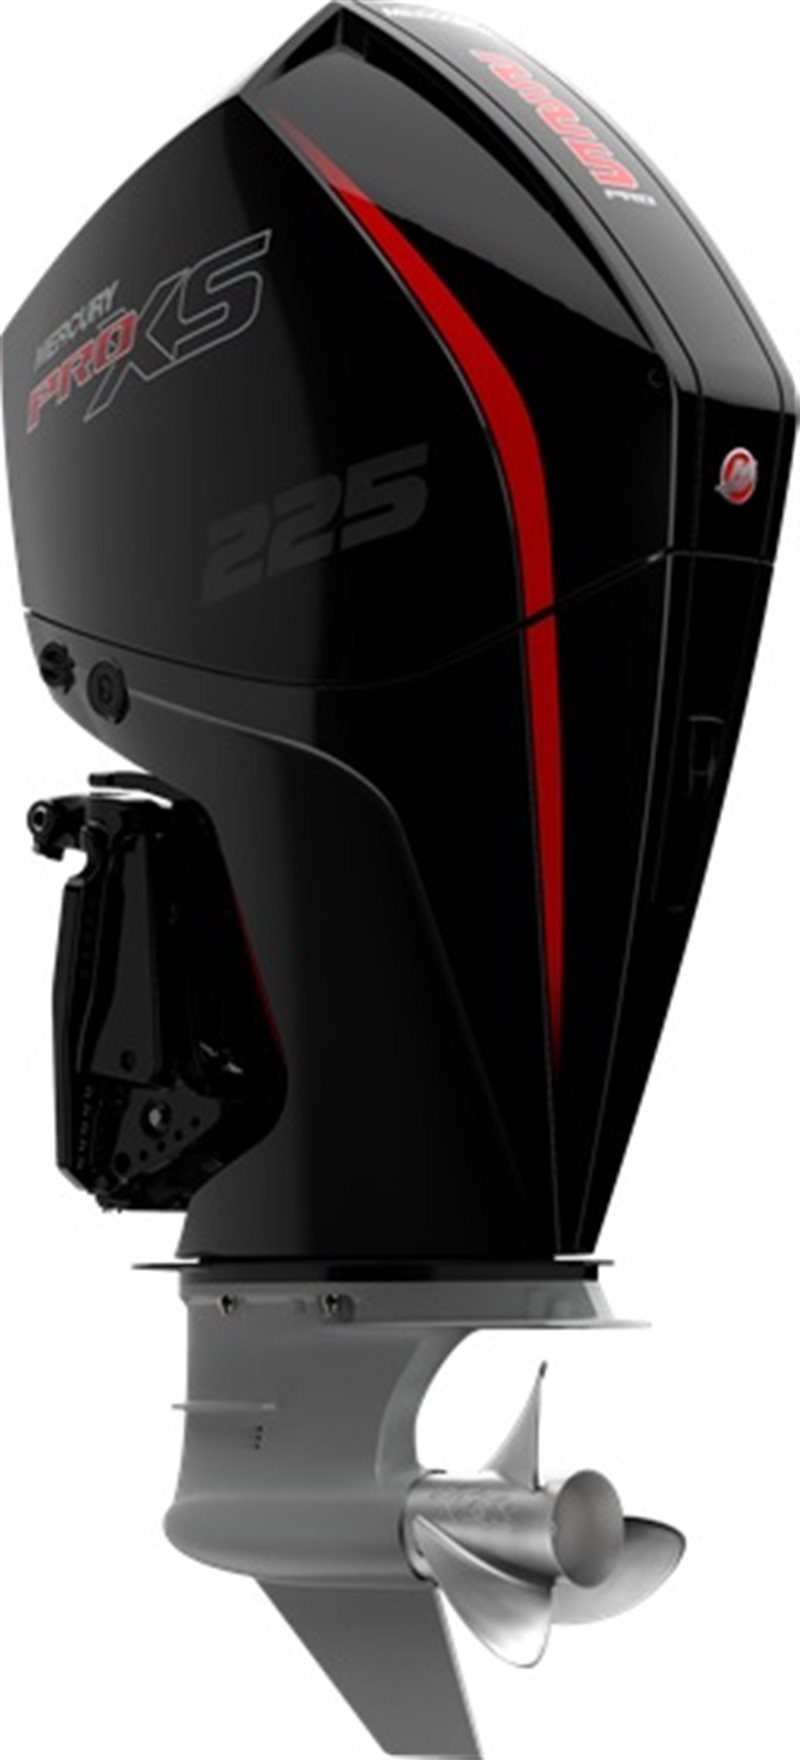 2021 Mercury Outboard Pro XS 175 - 300 Pro XS 225 at Fort Fremont Marine